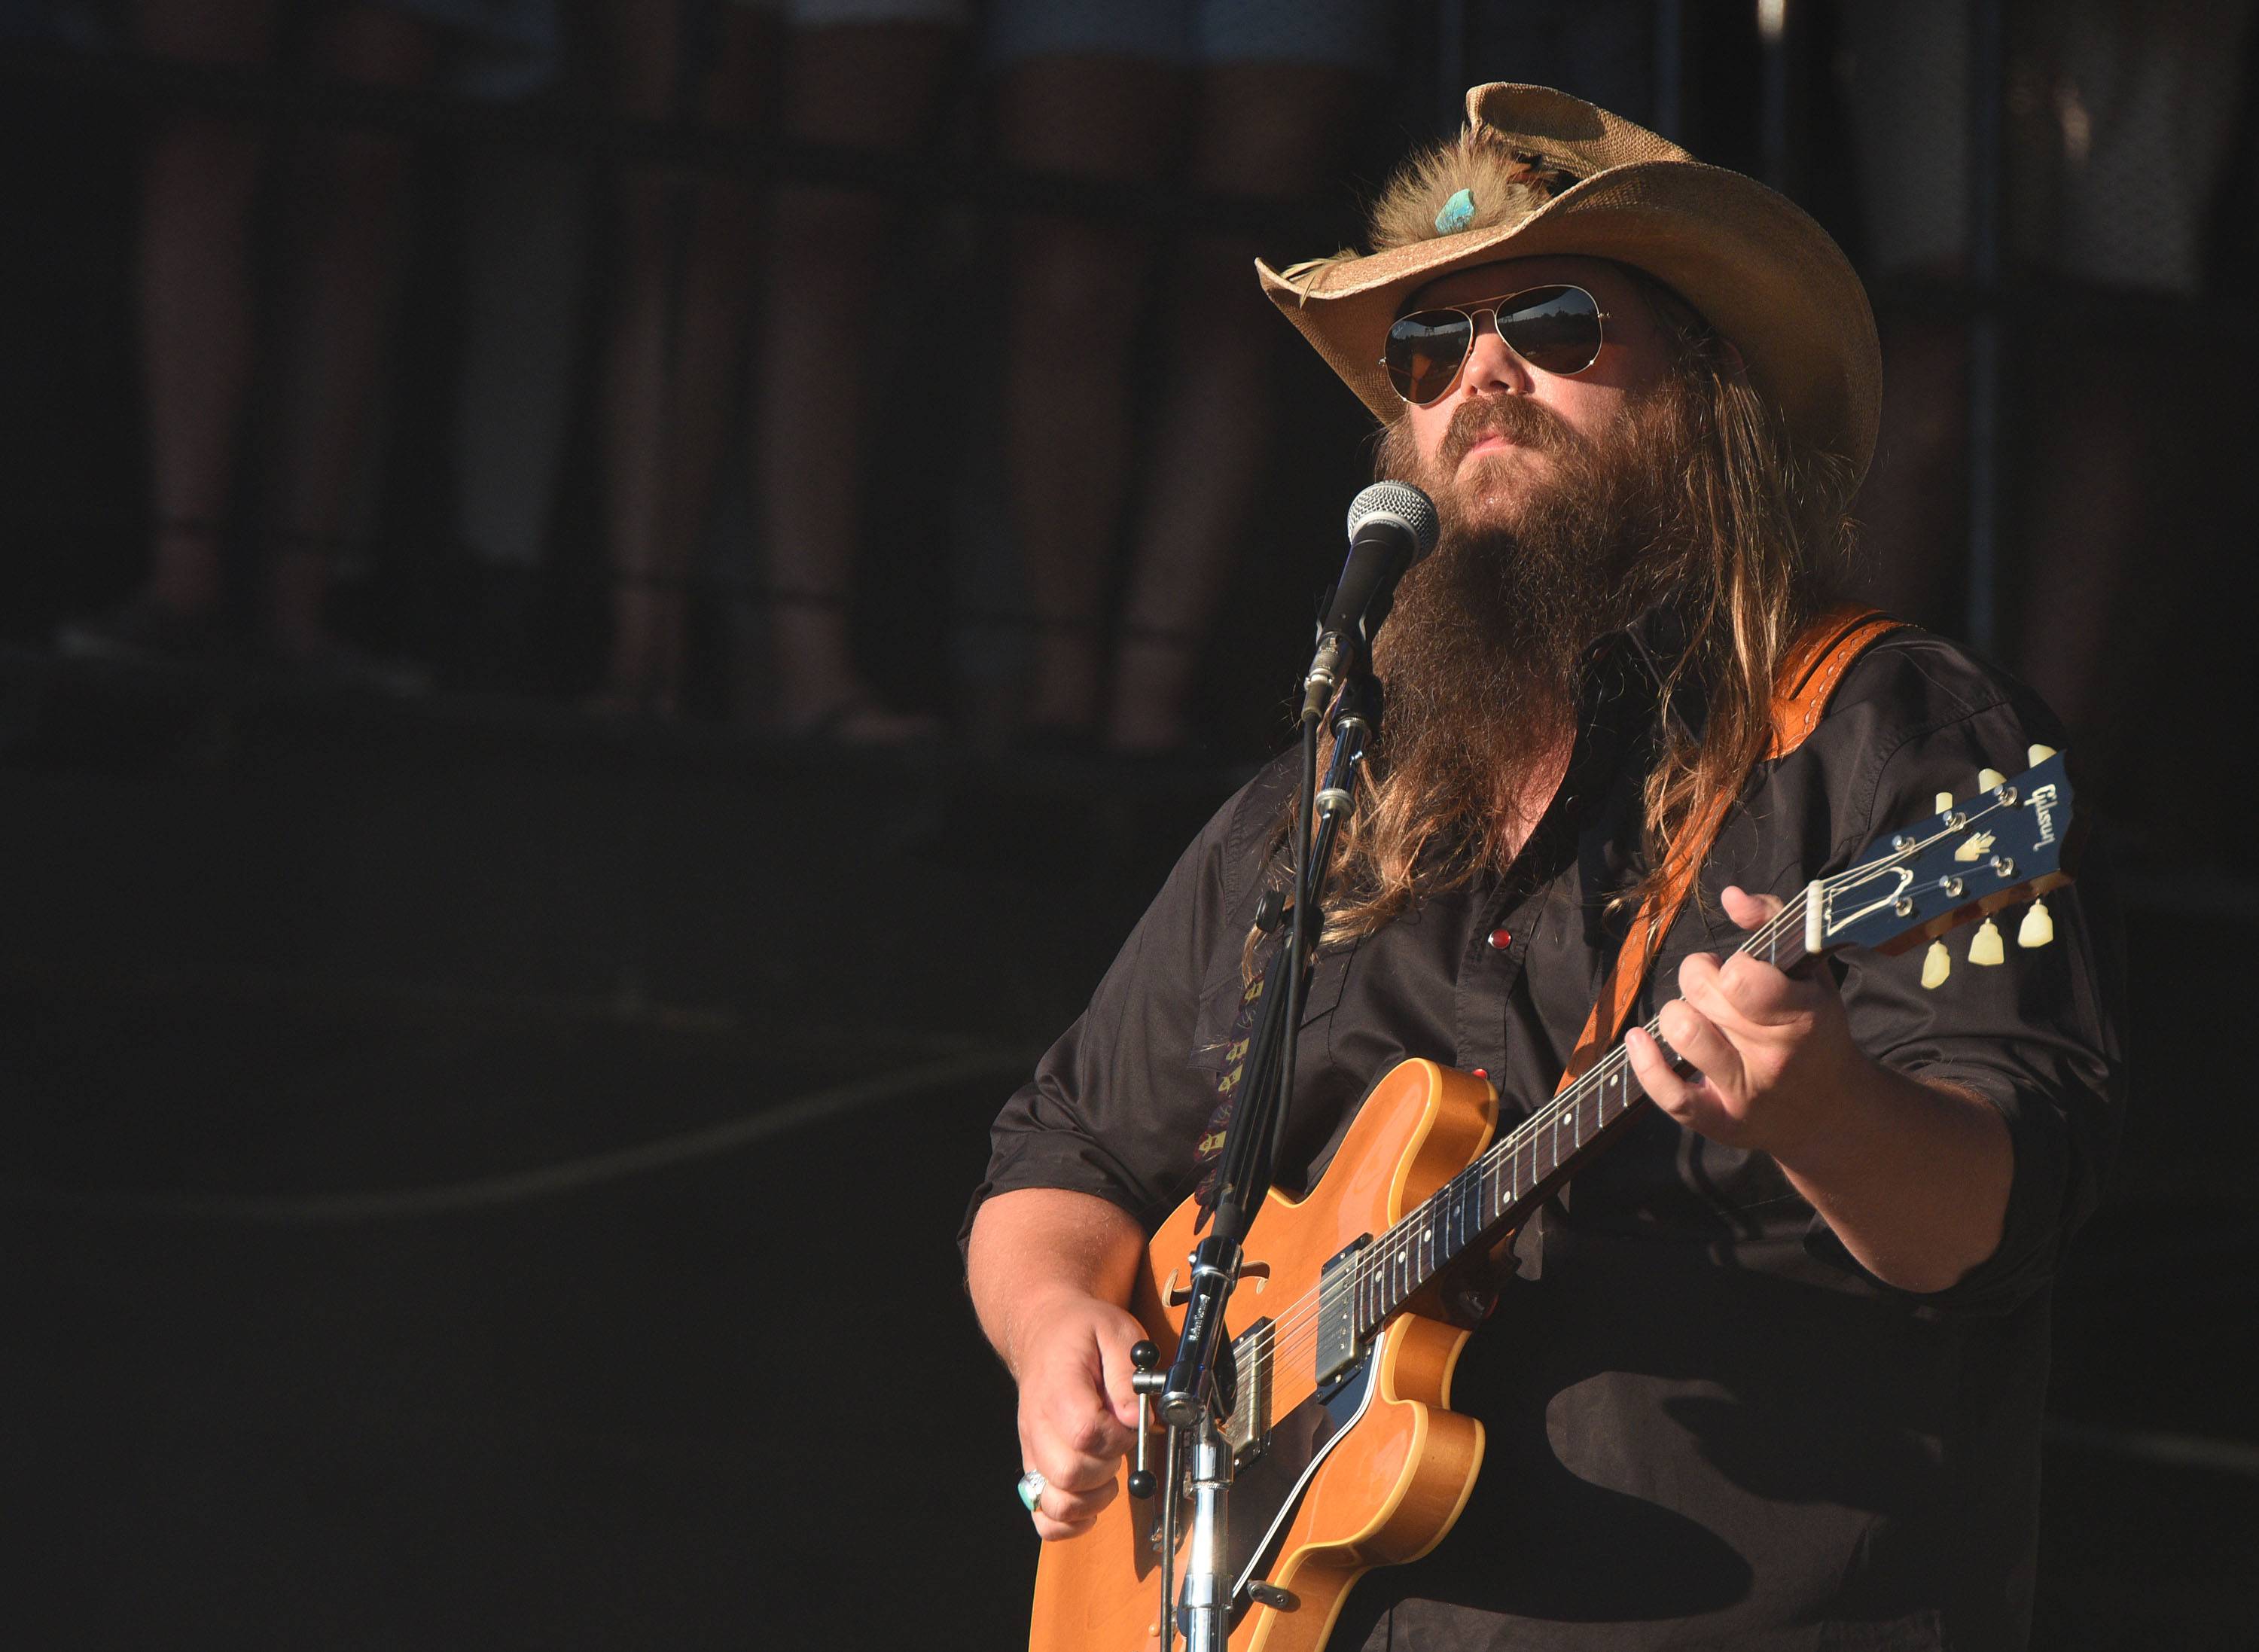 Chris Stapleton Scores Another No. 1 with "You Should Probably Leave